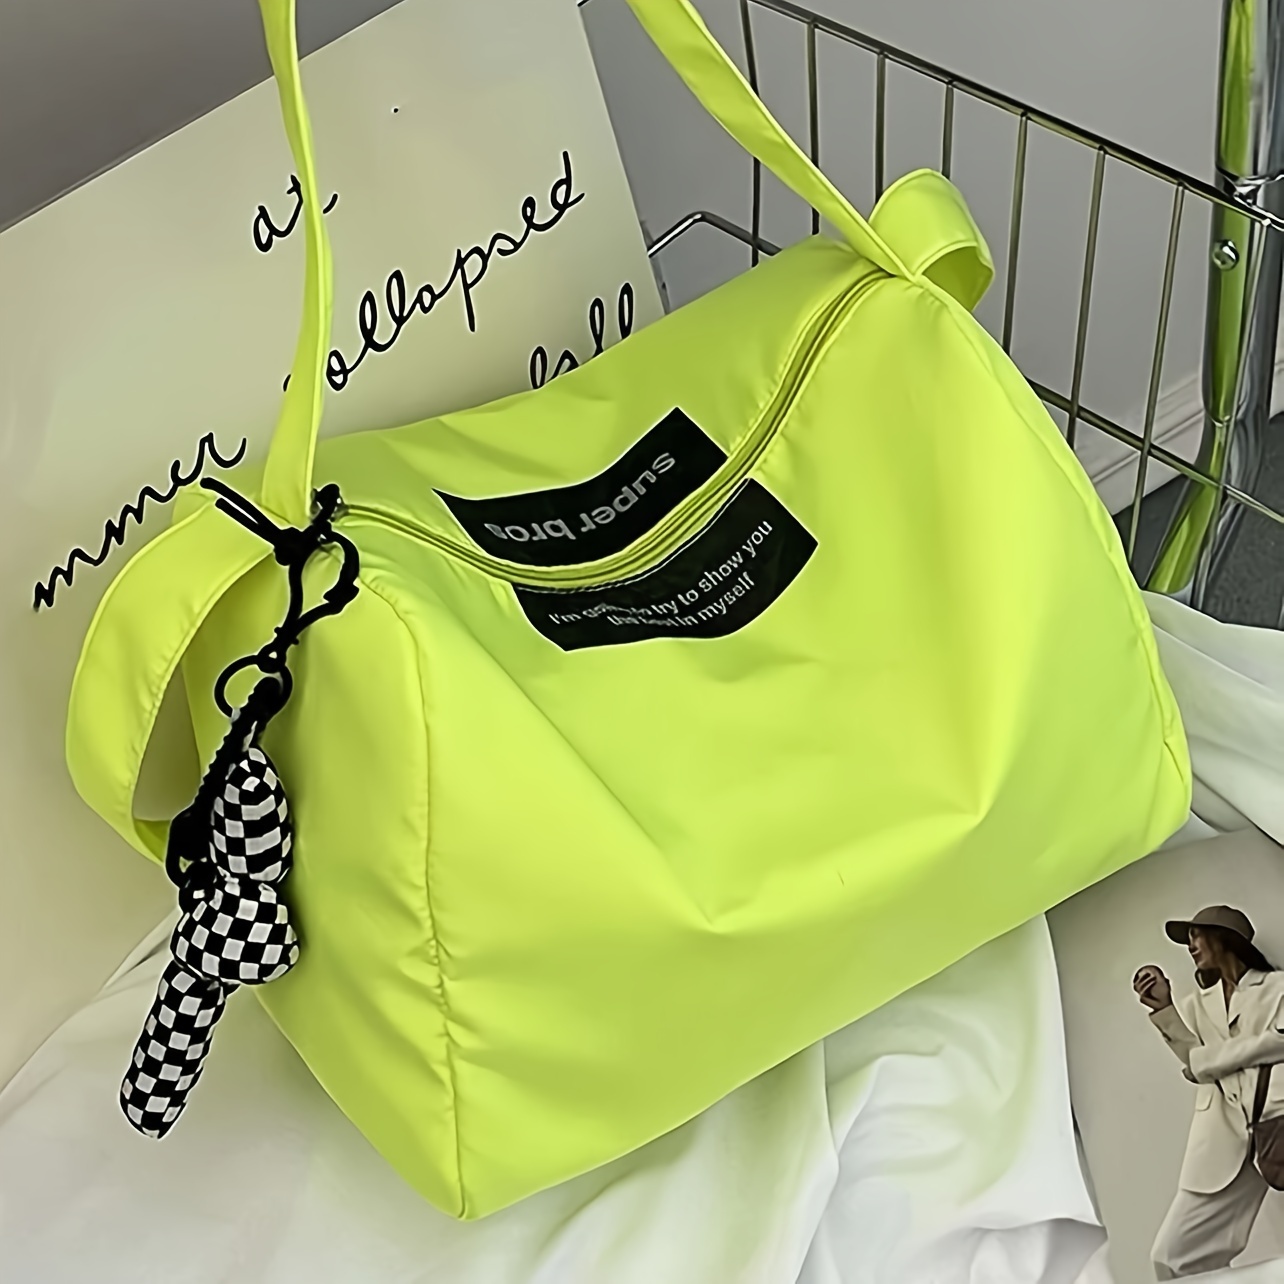 

Green Nylon Hobo Bag With Letter Patch And Checkered Bag Charm, Spacious Shoulder Bag With Zipper Closure For Women